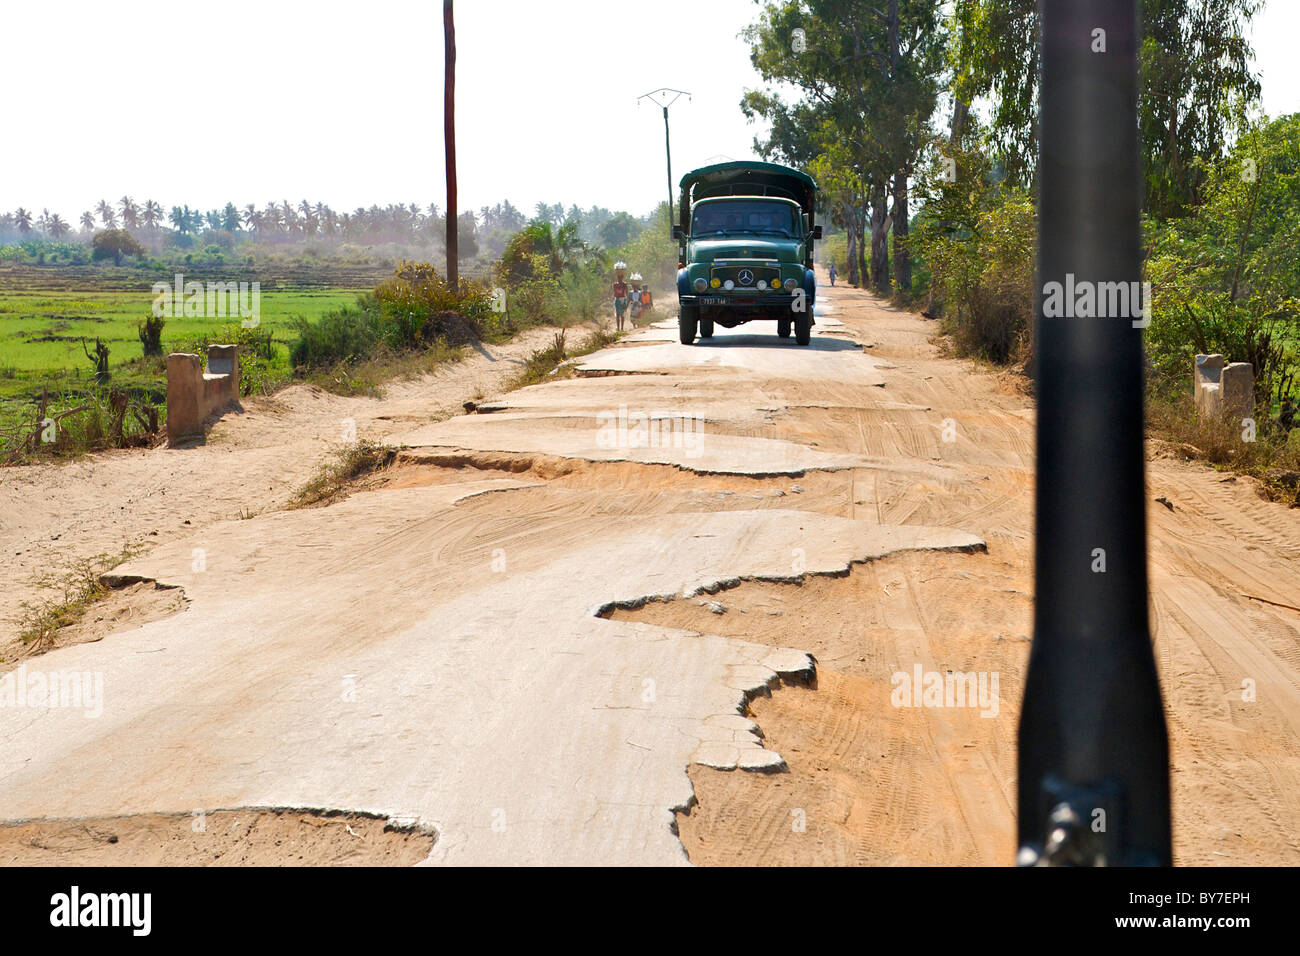 A truck on the dilapidated tar road leading out of the town of Morondava on the southwestern coast of Madagascar. Stock Photo